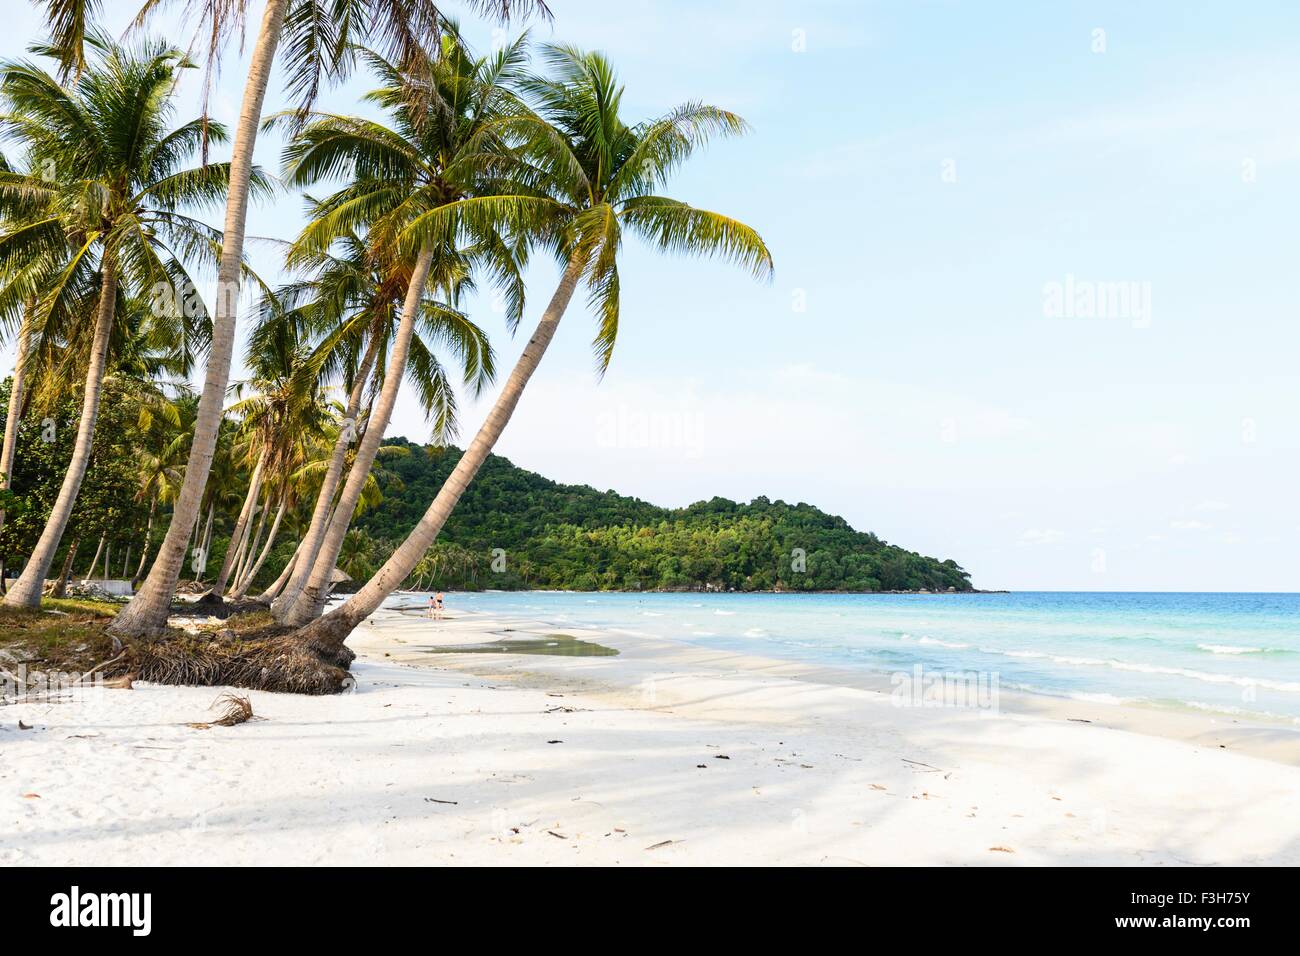 View of Sao beach and palm trees, Pho Quoc, Vietnam Stock Photo